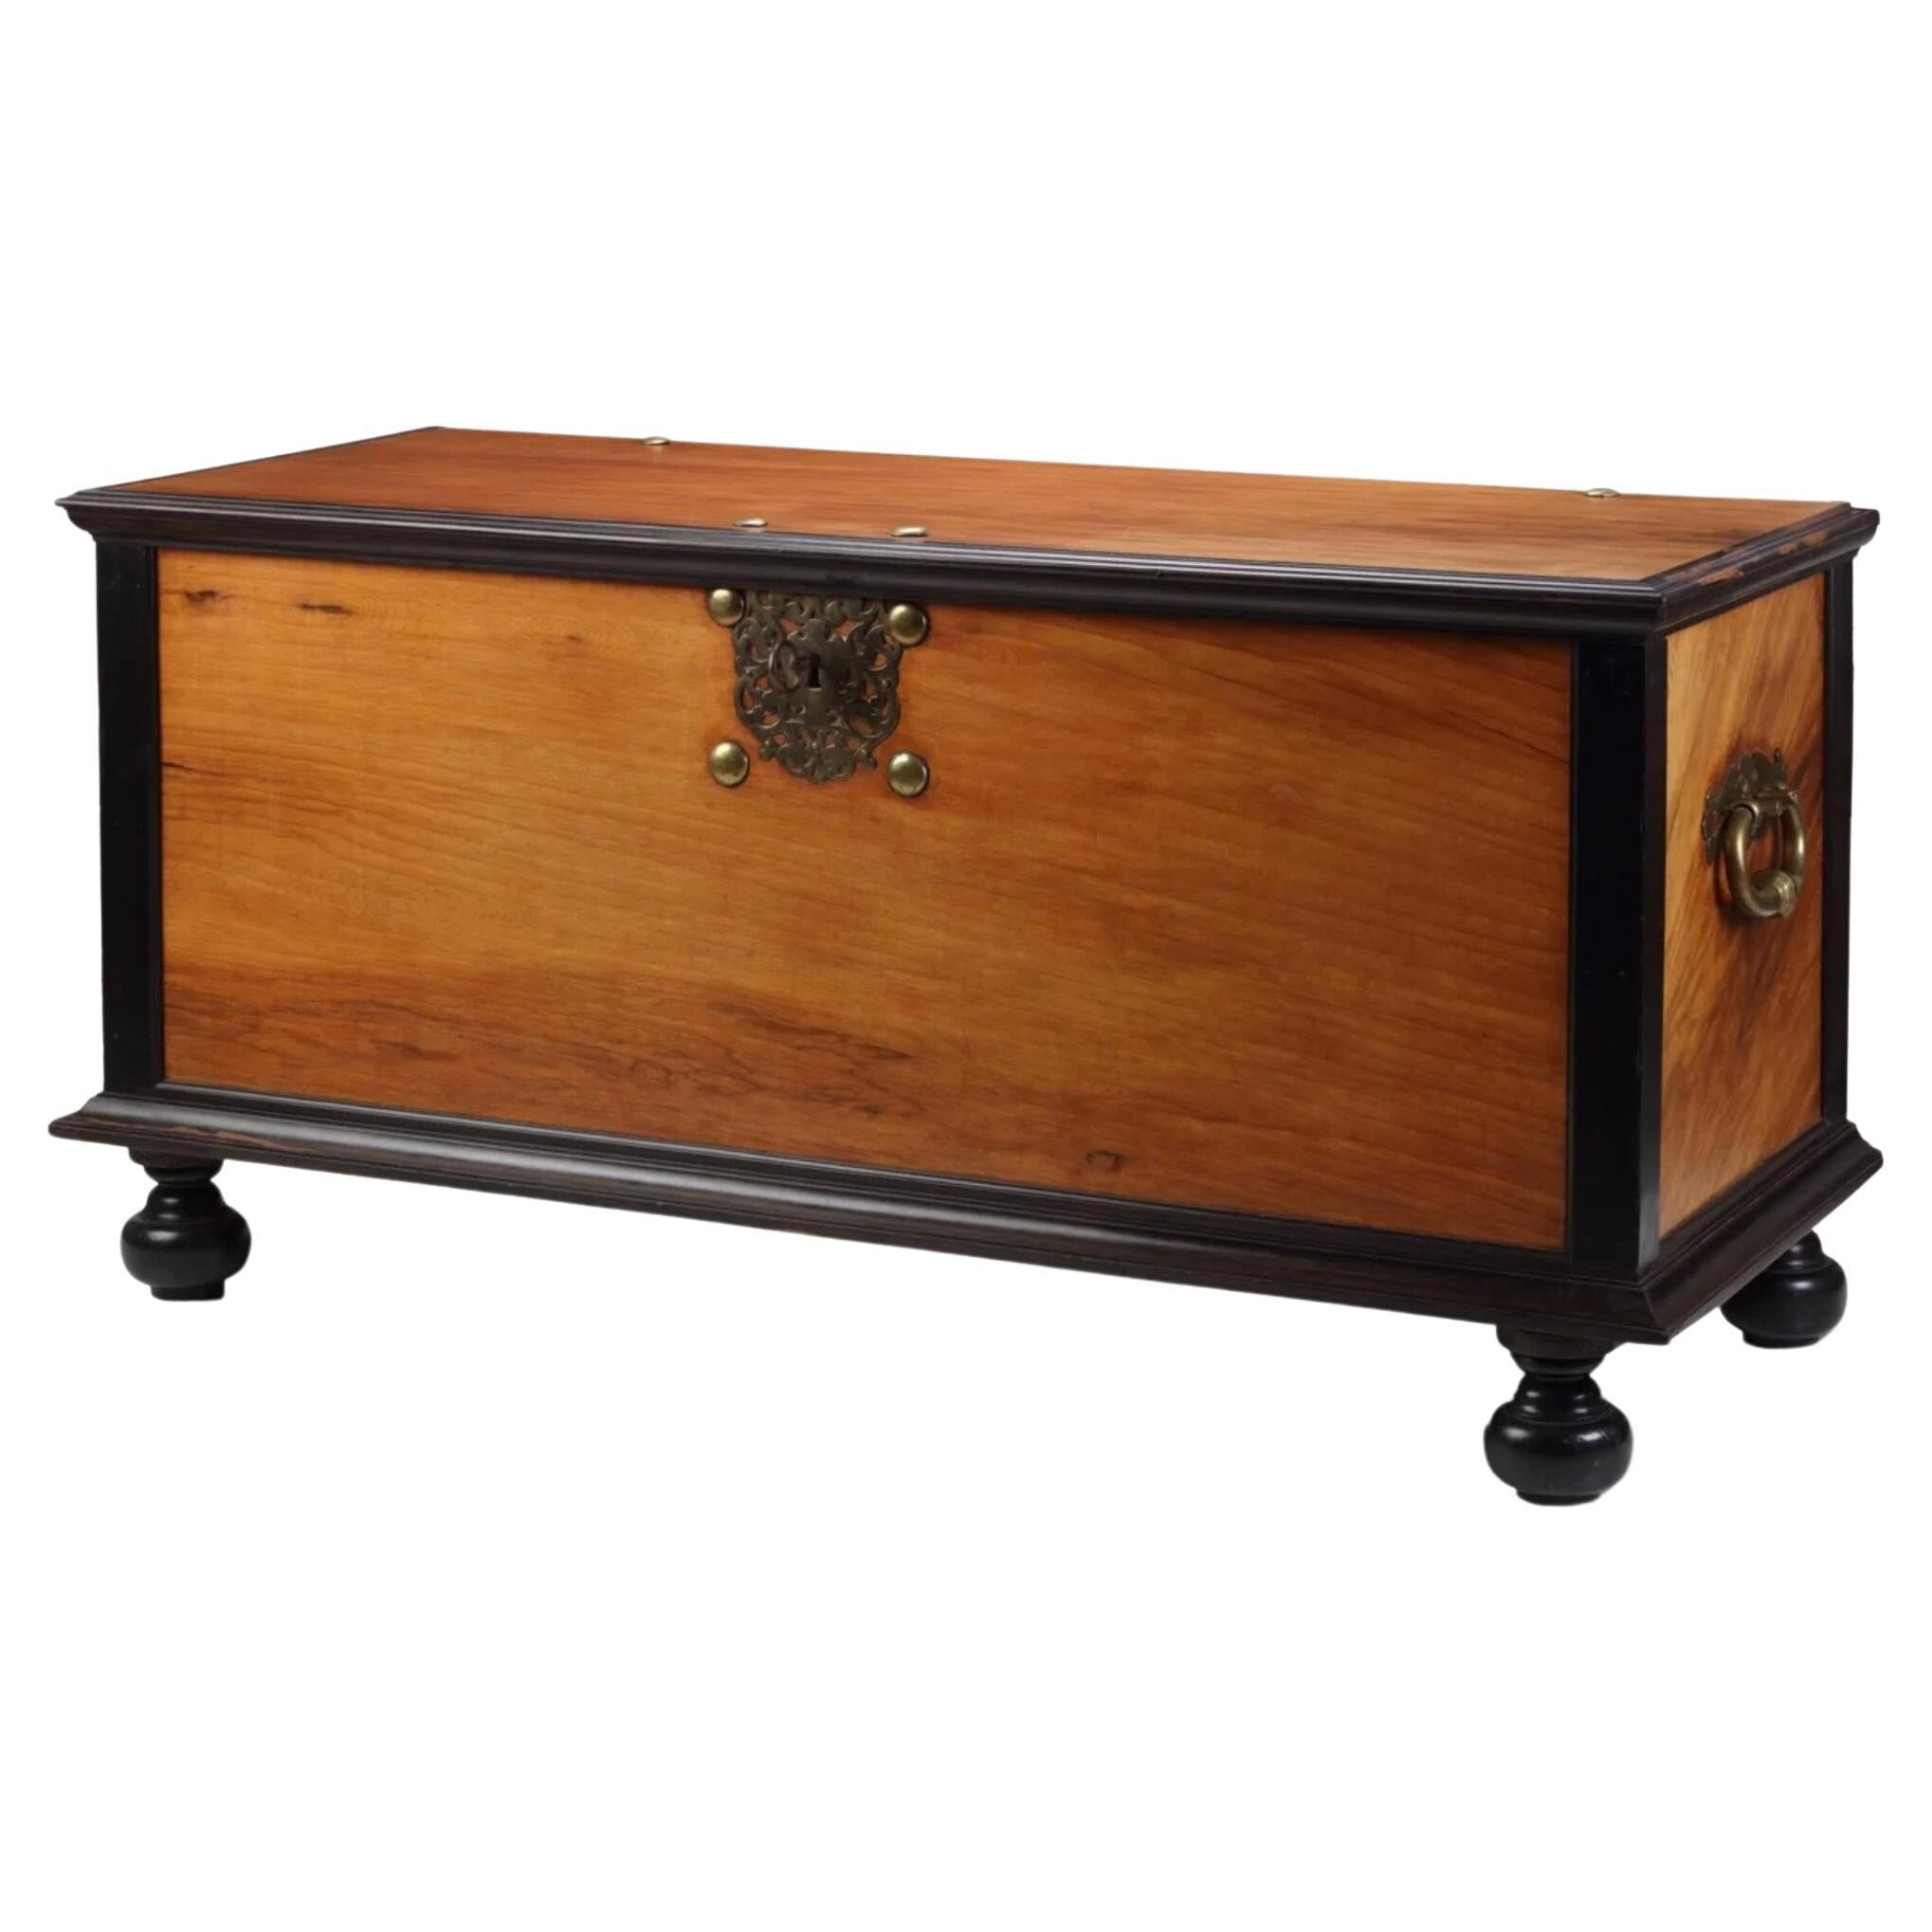 Dutch-colonial five-foot 18th century amboyna wood VOC chest with brass mounts For Sale